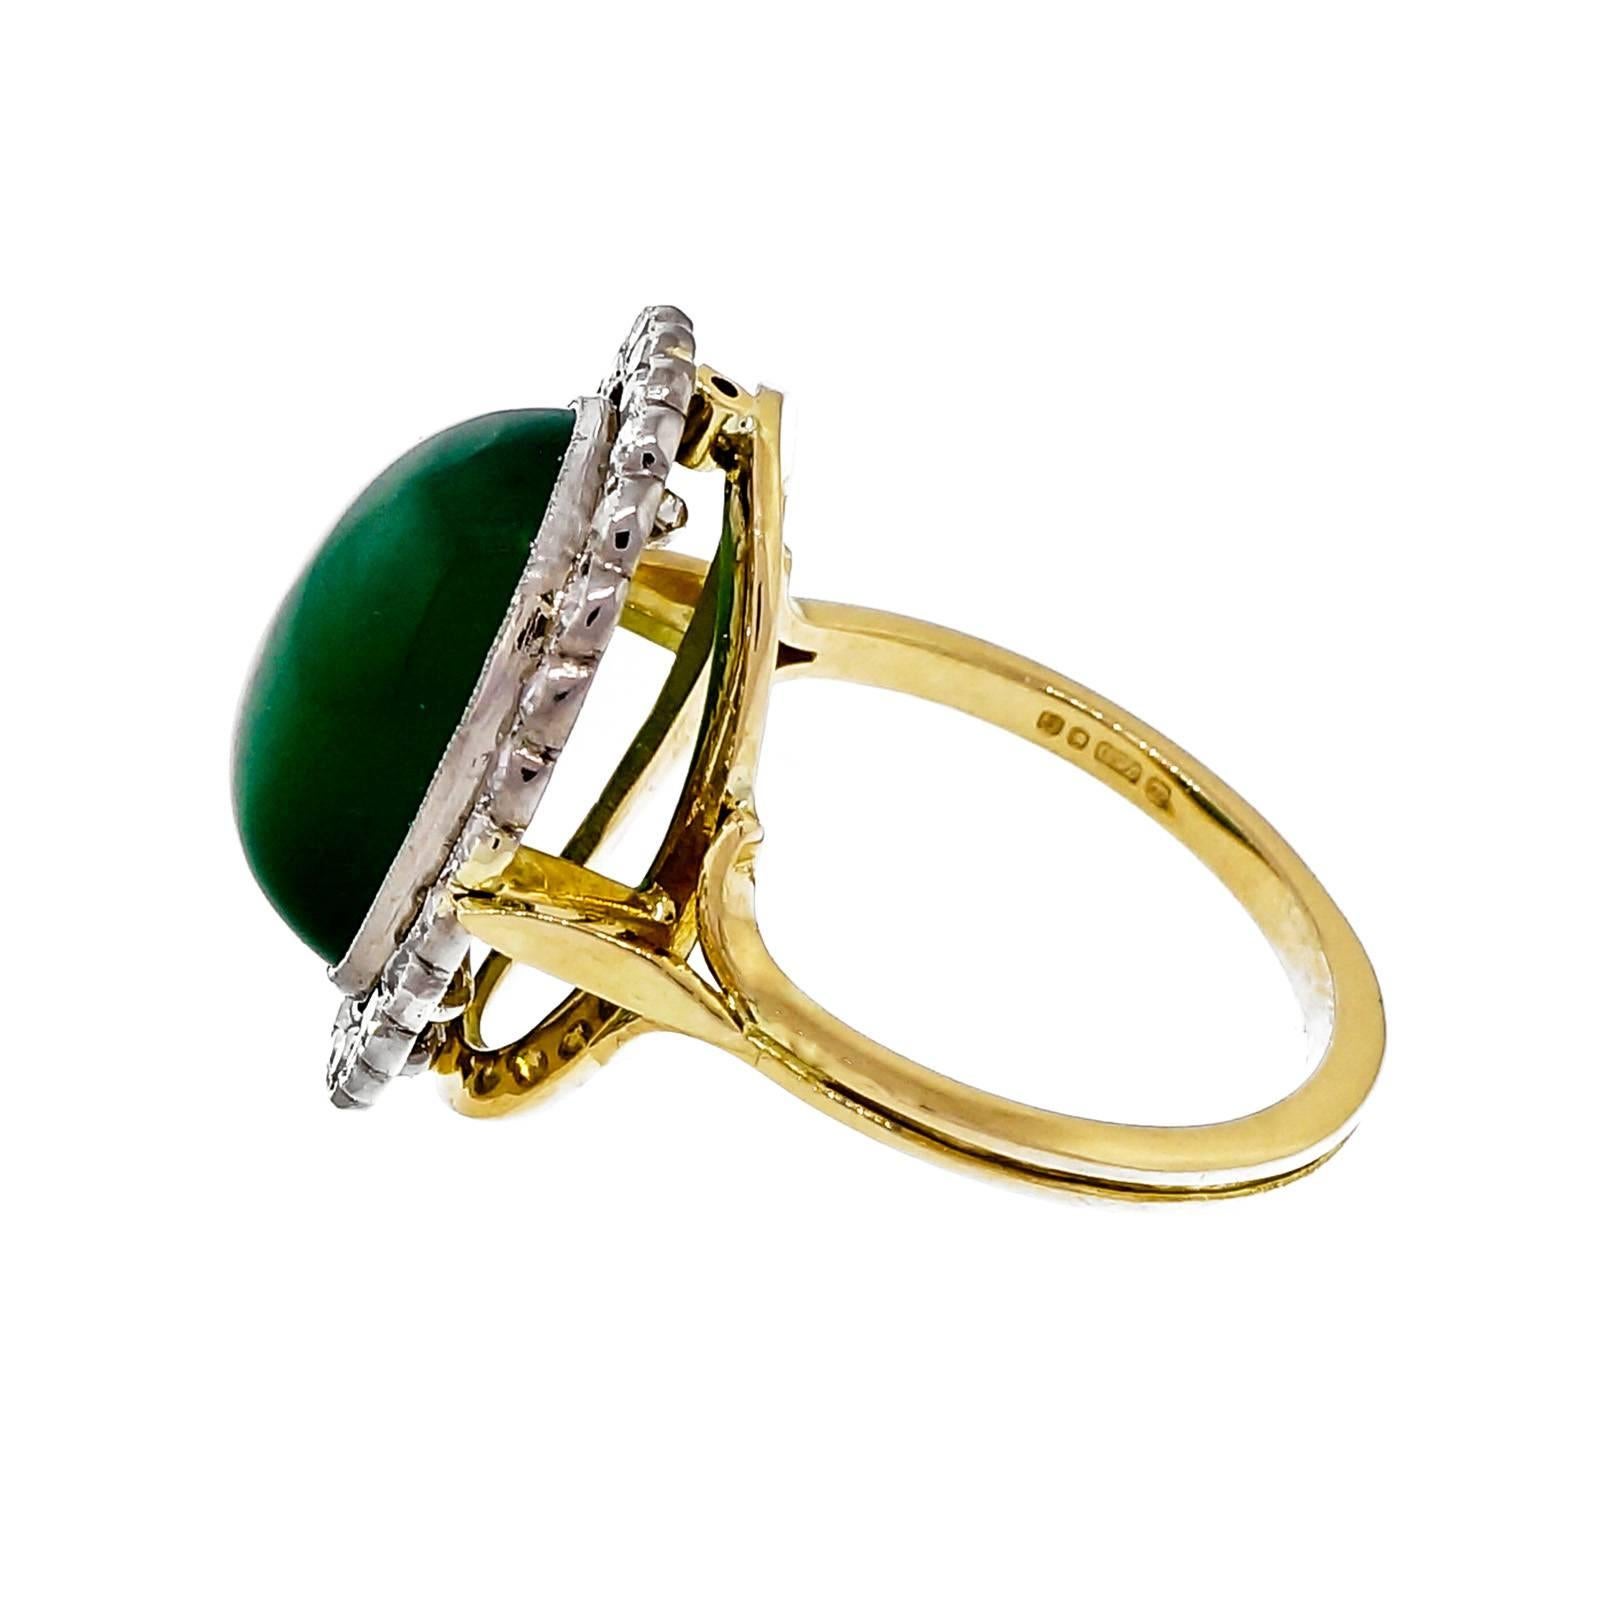 Vintage 1930-1940 translucent green Onyx set in a scalloped border cluster ring with European single cut diamonds.

18k white and yellow gold
1 oval green translucent Onyx, approx. total weight 3.00cts, 14.87 x 10.40mm
28 old European single cut